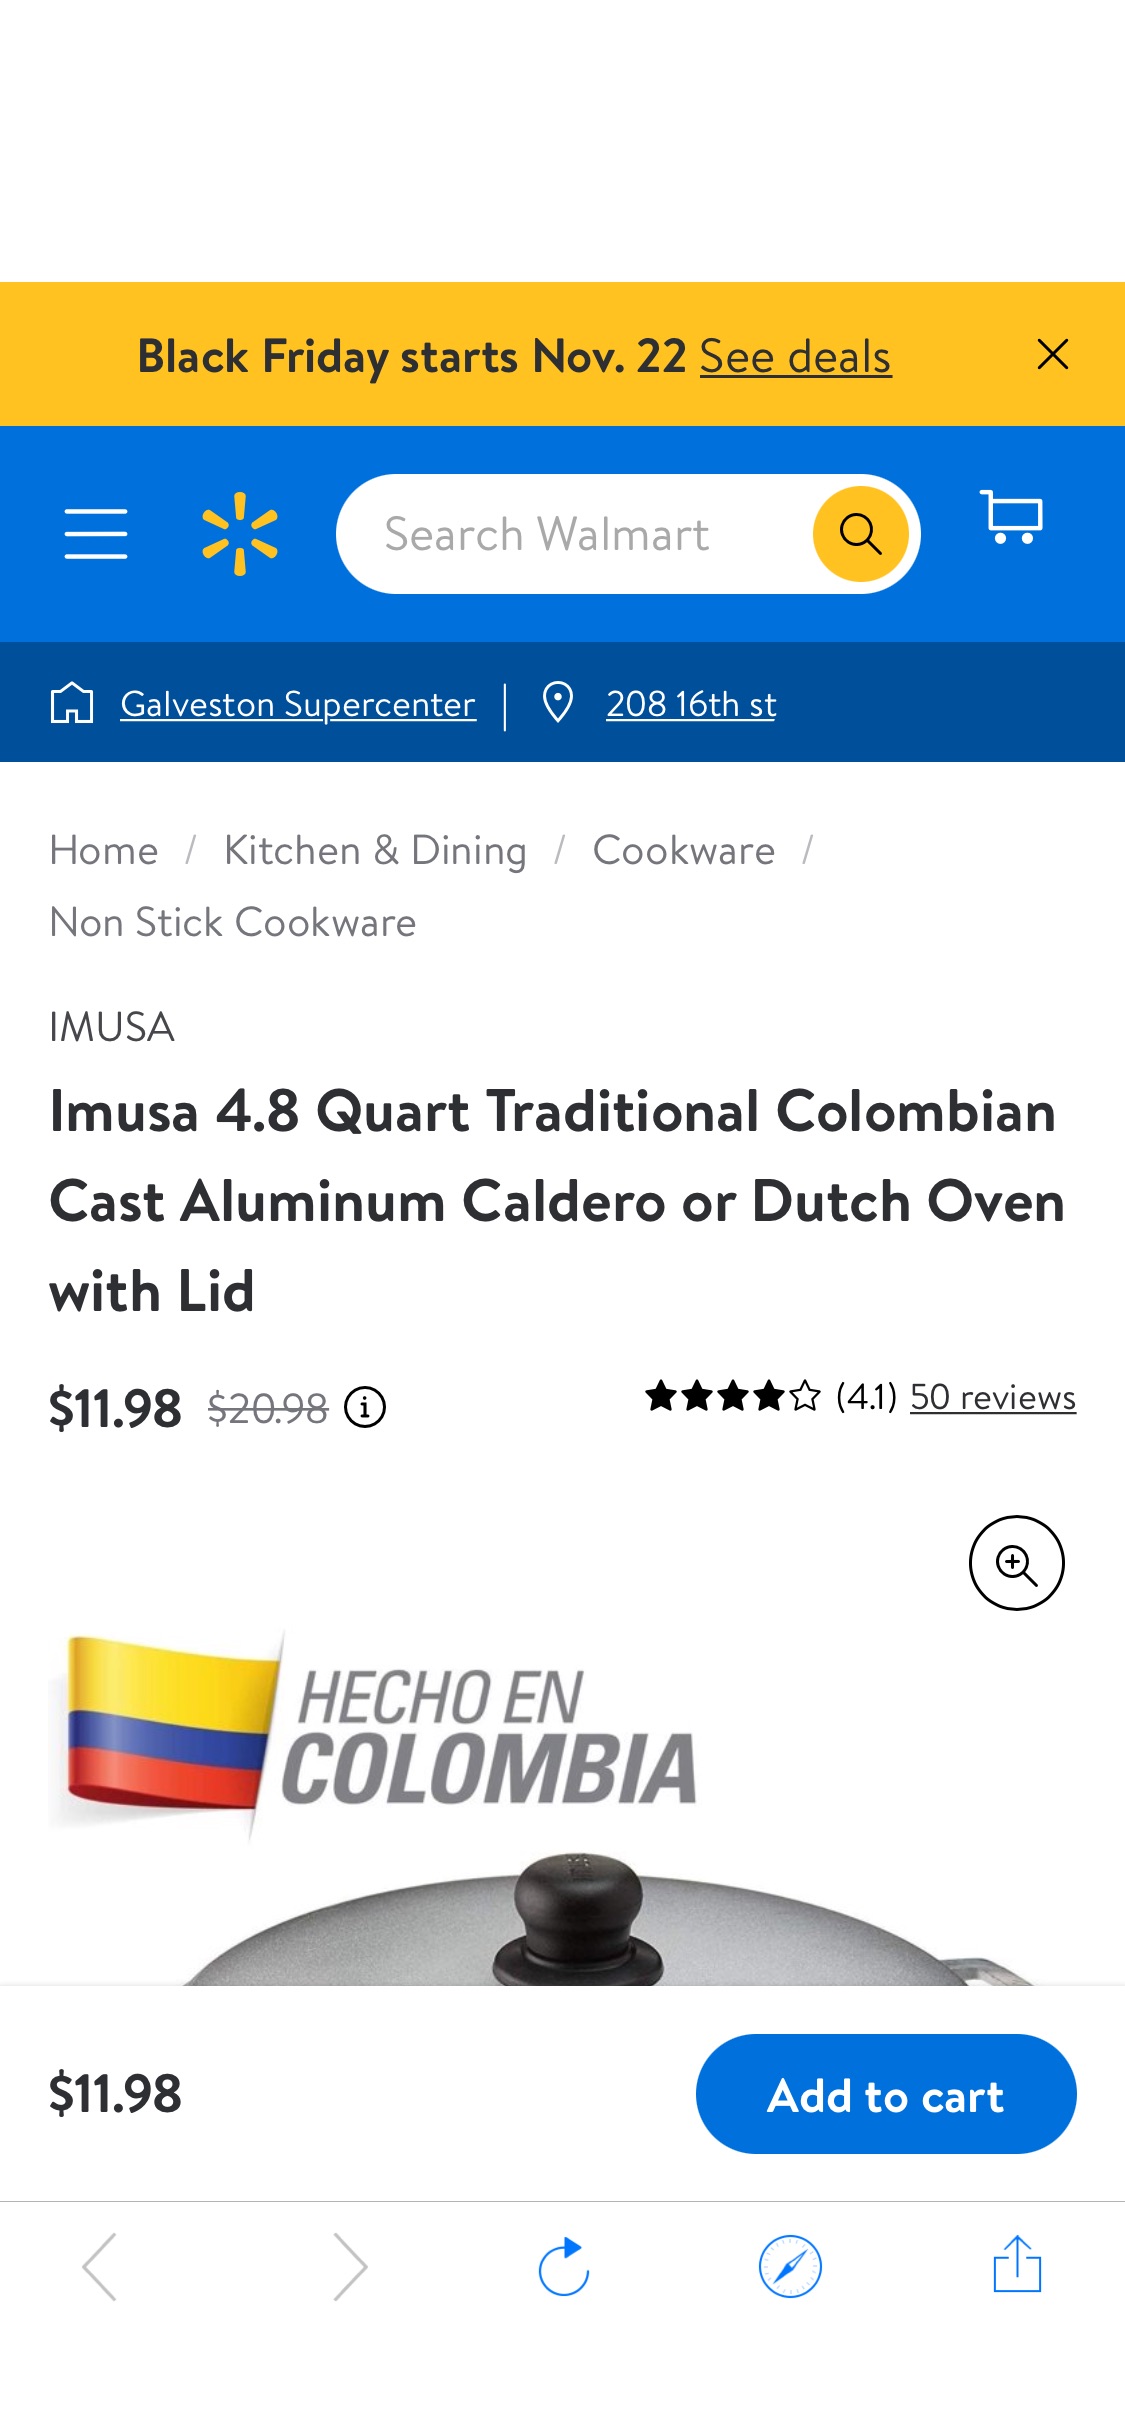 Imusa 4.8 Quart 铝锅Traditional Colombian Cast Aluminum Caldero or Dutch Oven with Lid